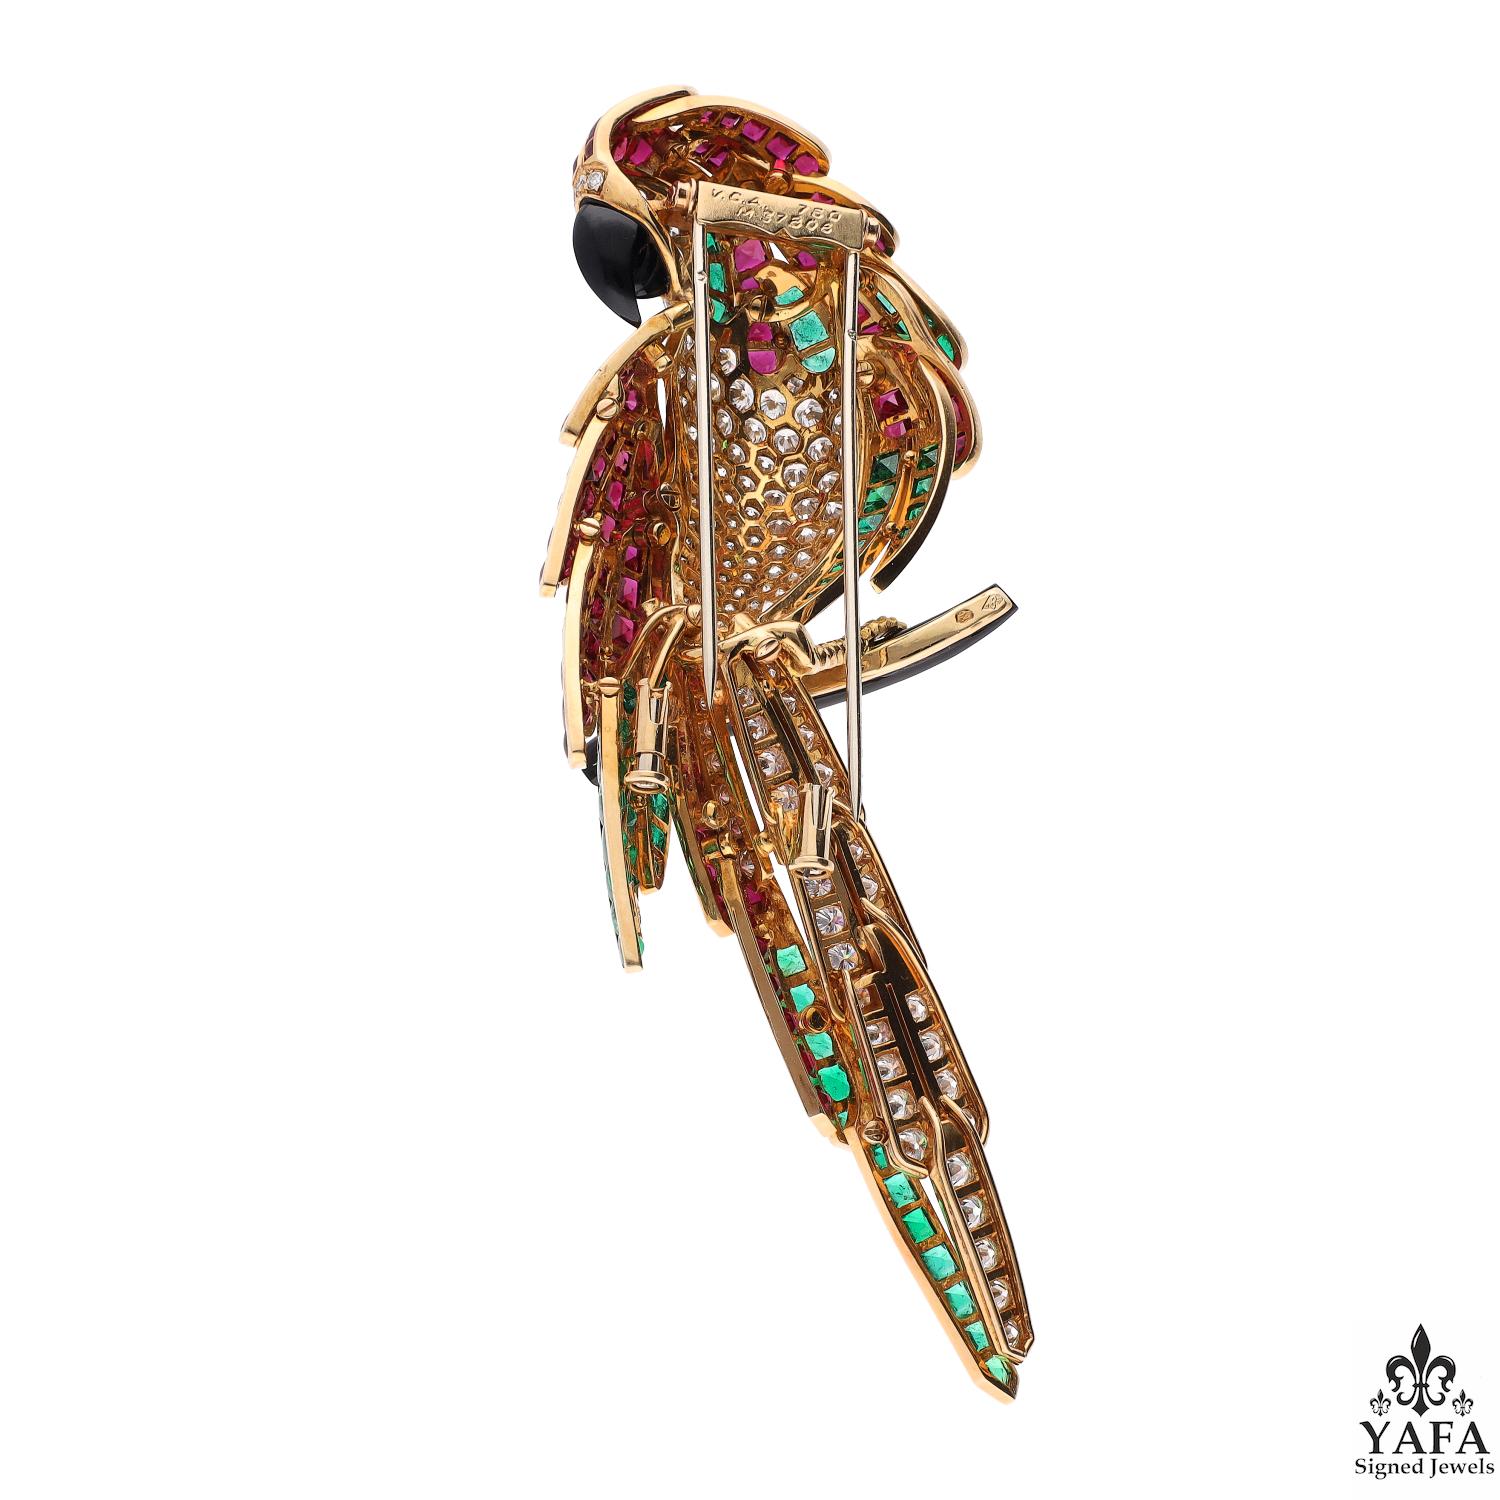 Van Cleef & Arpels Paris Vintage Collection Multi Gem Diamond Parrot of Splendor Brooch

Van Cleef & Arpels mastered the art of precious birds in flight in the early 1920s.  No Parisian Maison has excelled so much since. Our 18kt yellow gold